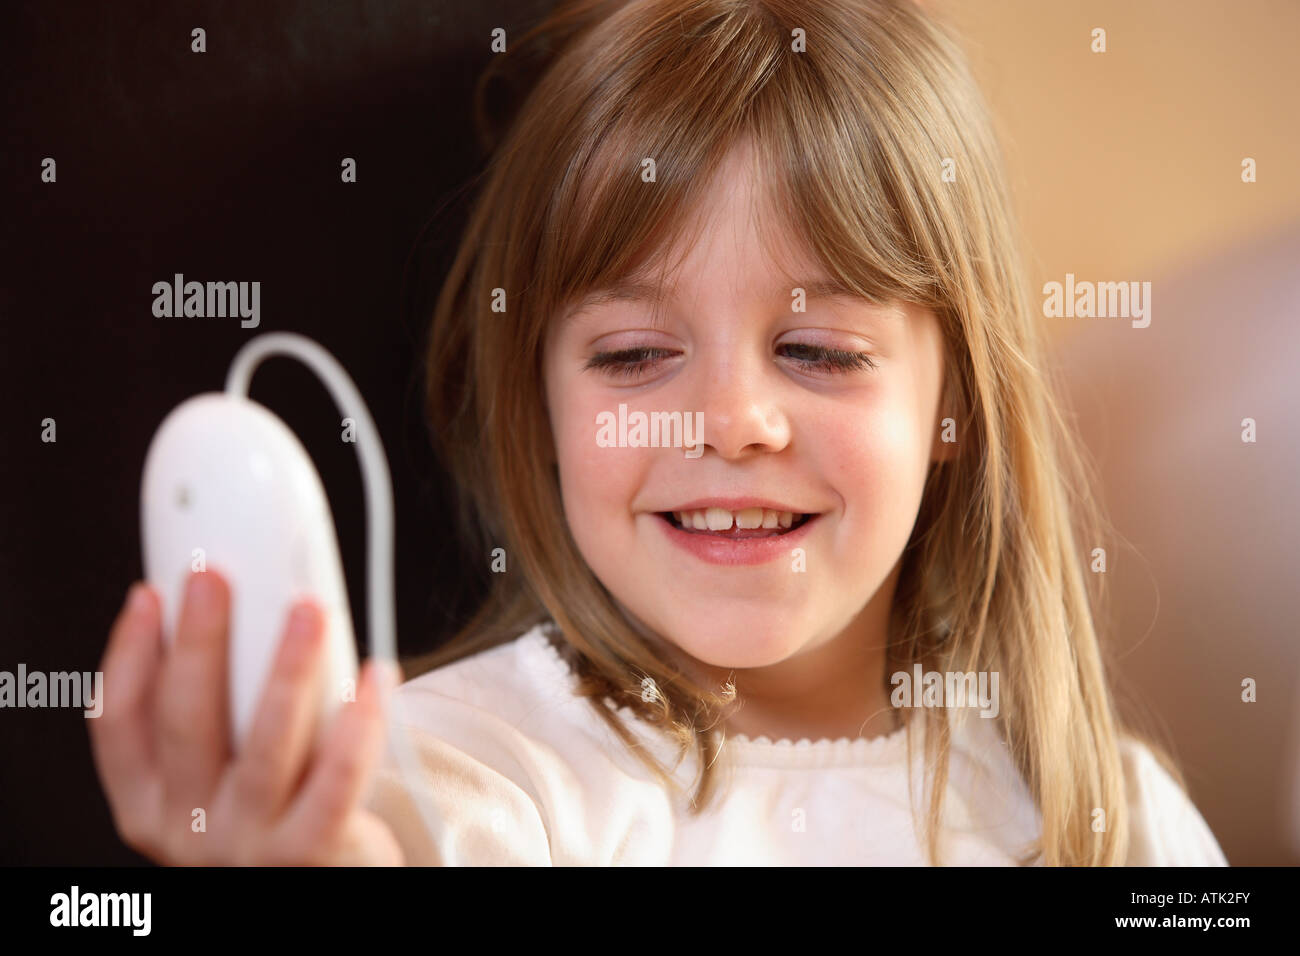 Child holding up computer mouse Stock Photo